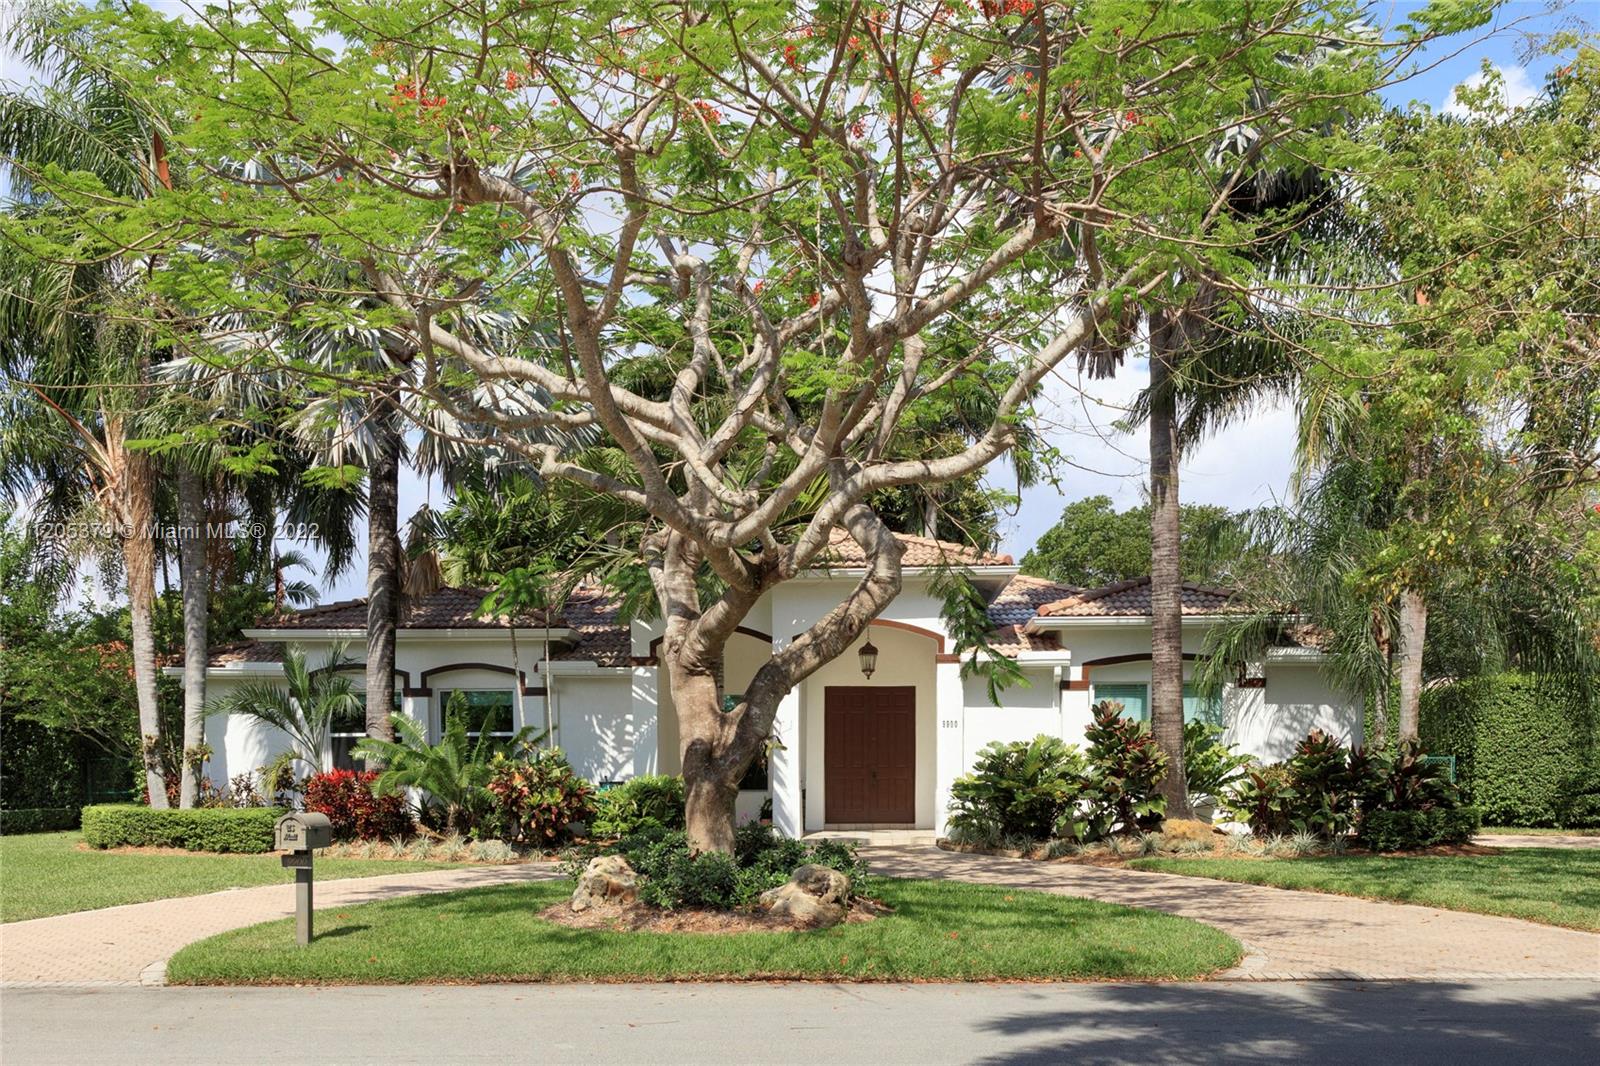 Set on the corner of a quiet North Pinecrest cul-de-sac with views of one of Miami’s largest banyan trees, this inviting home is too good to miss! As you step into the formal foyer, be enchanted by the high vaulted ceilings and bright open floor plan. With formal living and dining rooms, a family room, and a large kitchen with a breakfast area, there’s plenty of space for family and friends. From the kitchen or family room, step out on to your covered terrace and enjoy the pristine backyard with fountains into the pool, tropical landscaping, and 25+ orchids hanging from the trees. Zoned for Pinecrest Elementary with top private and public schools nearby. Impact windows/doors, whole house generator, two-plus-car garage, and two paved driveways complete this picture-perfect home.